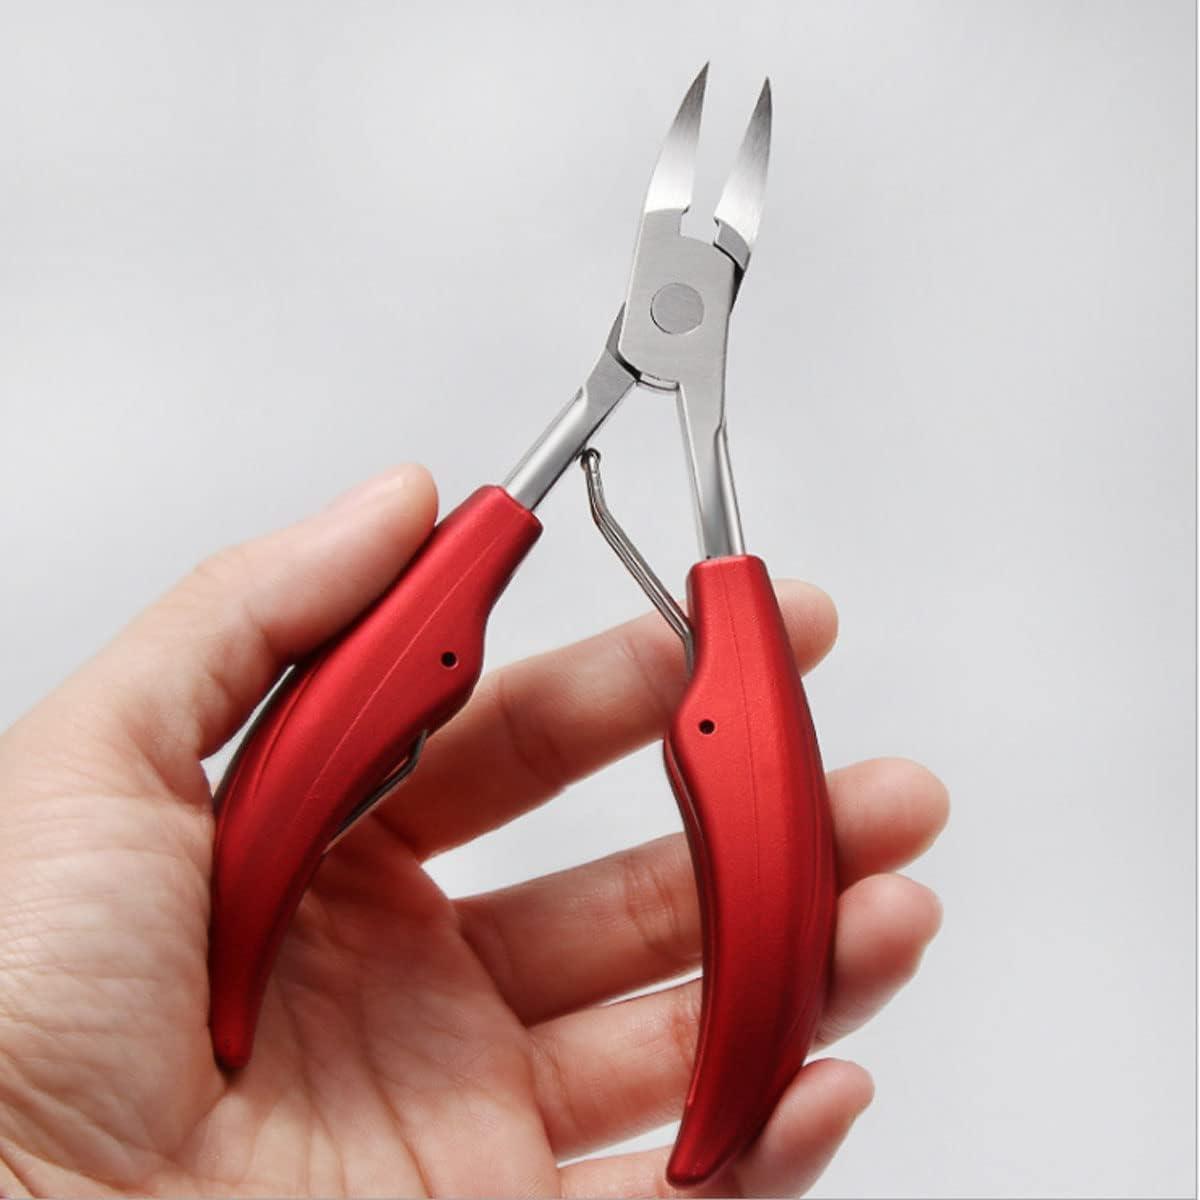 1pcs Heavy Duty Nail Clippers for Thick Nails - Best Professional